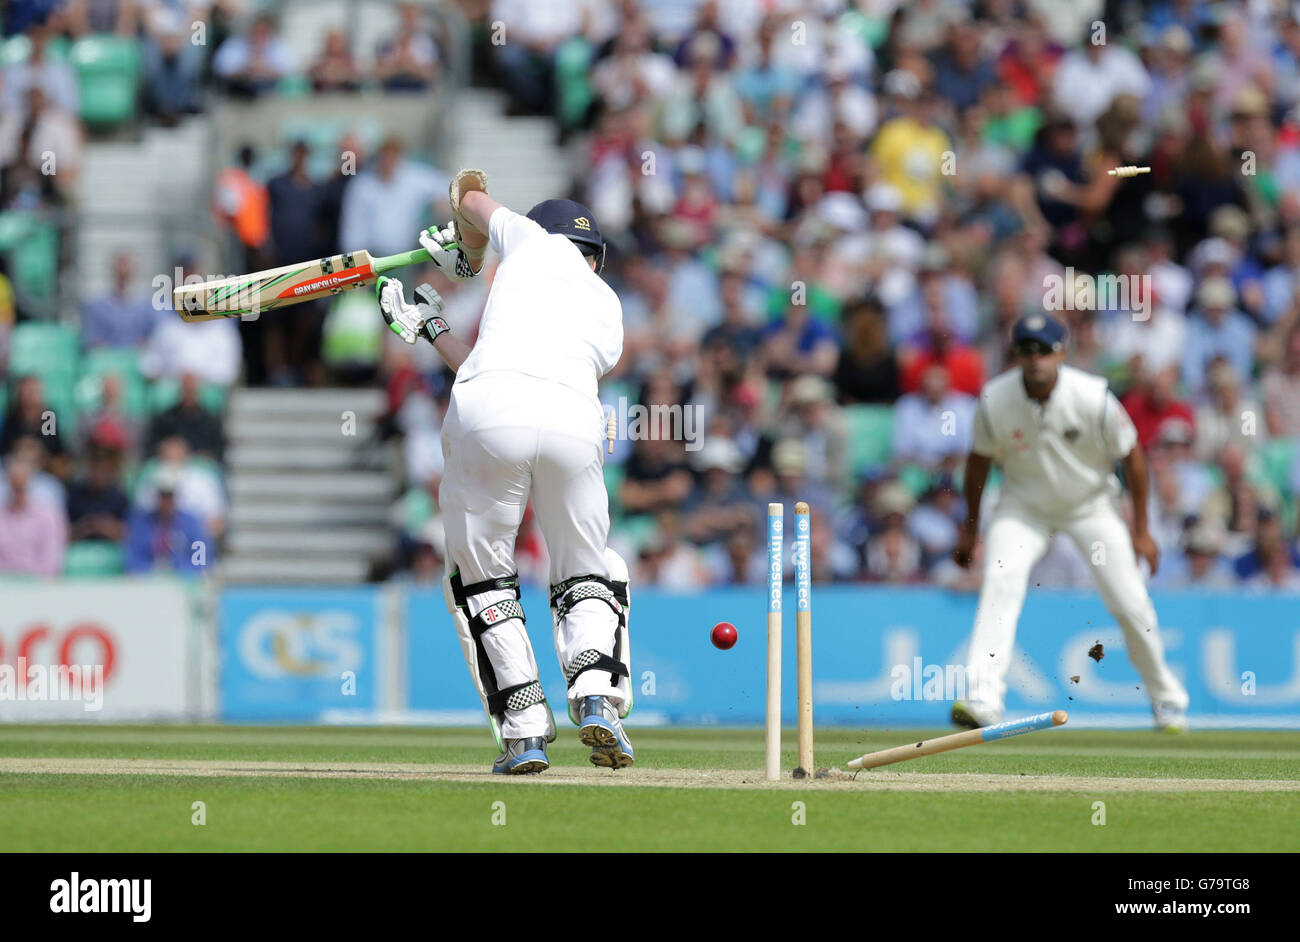 England's Sam Robson loses his wicket to India's Varun Aaron during the Fifth Test at The Kia Oval, London. Stock Photo